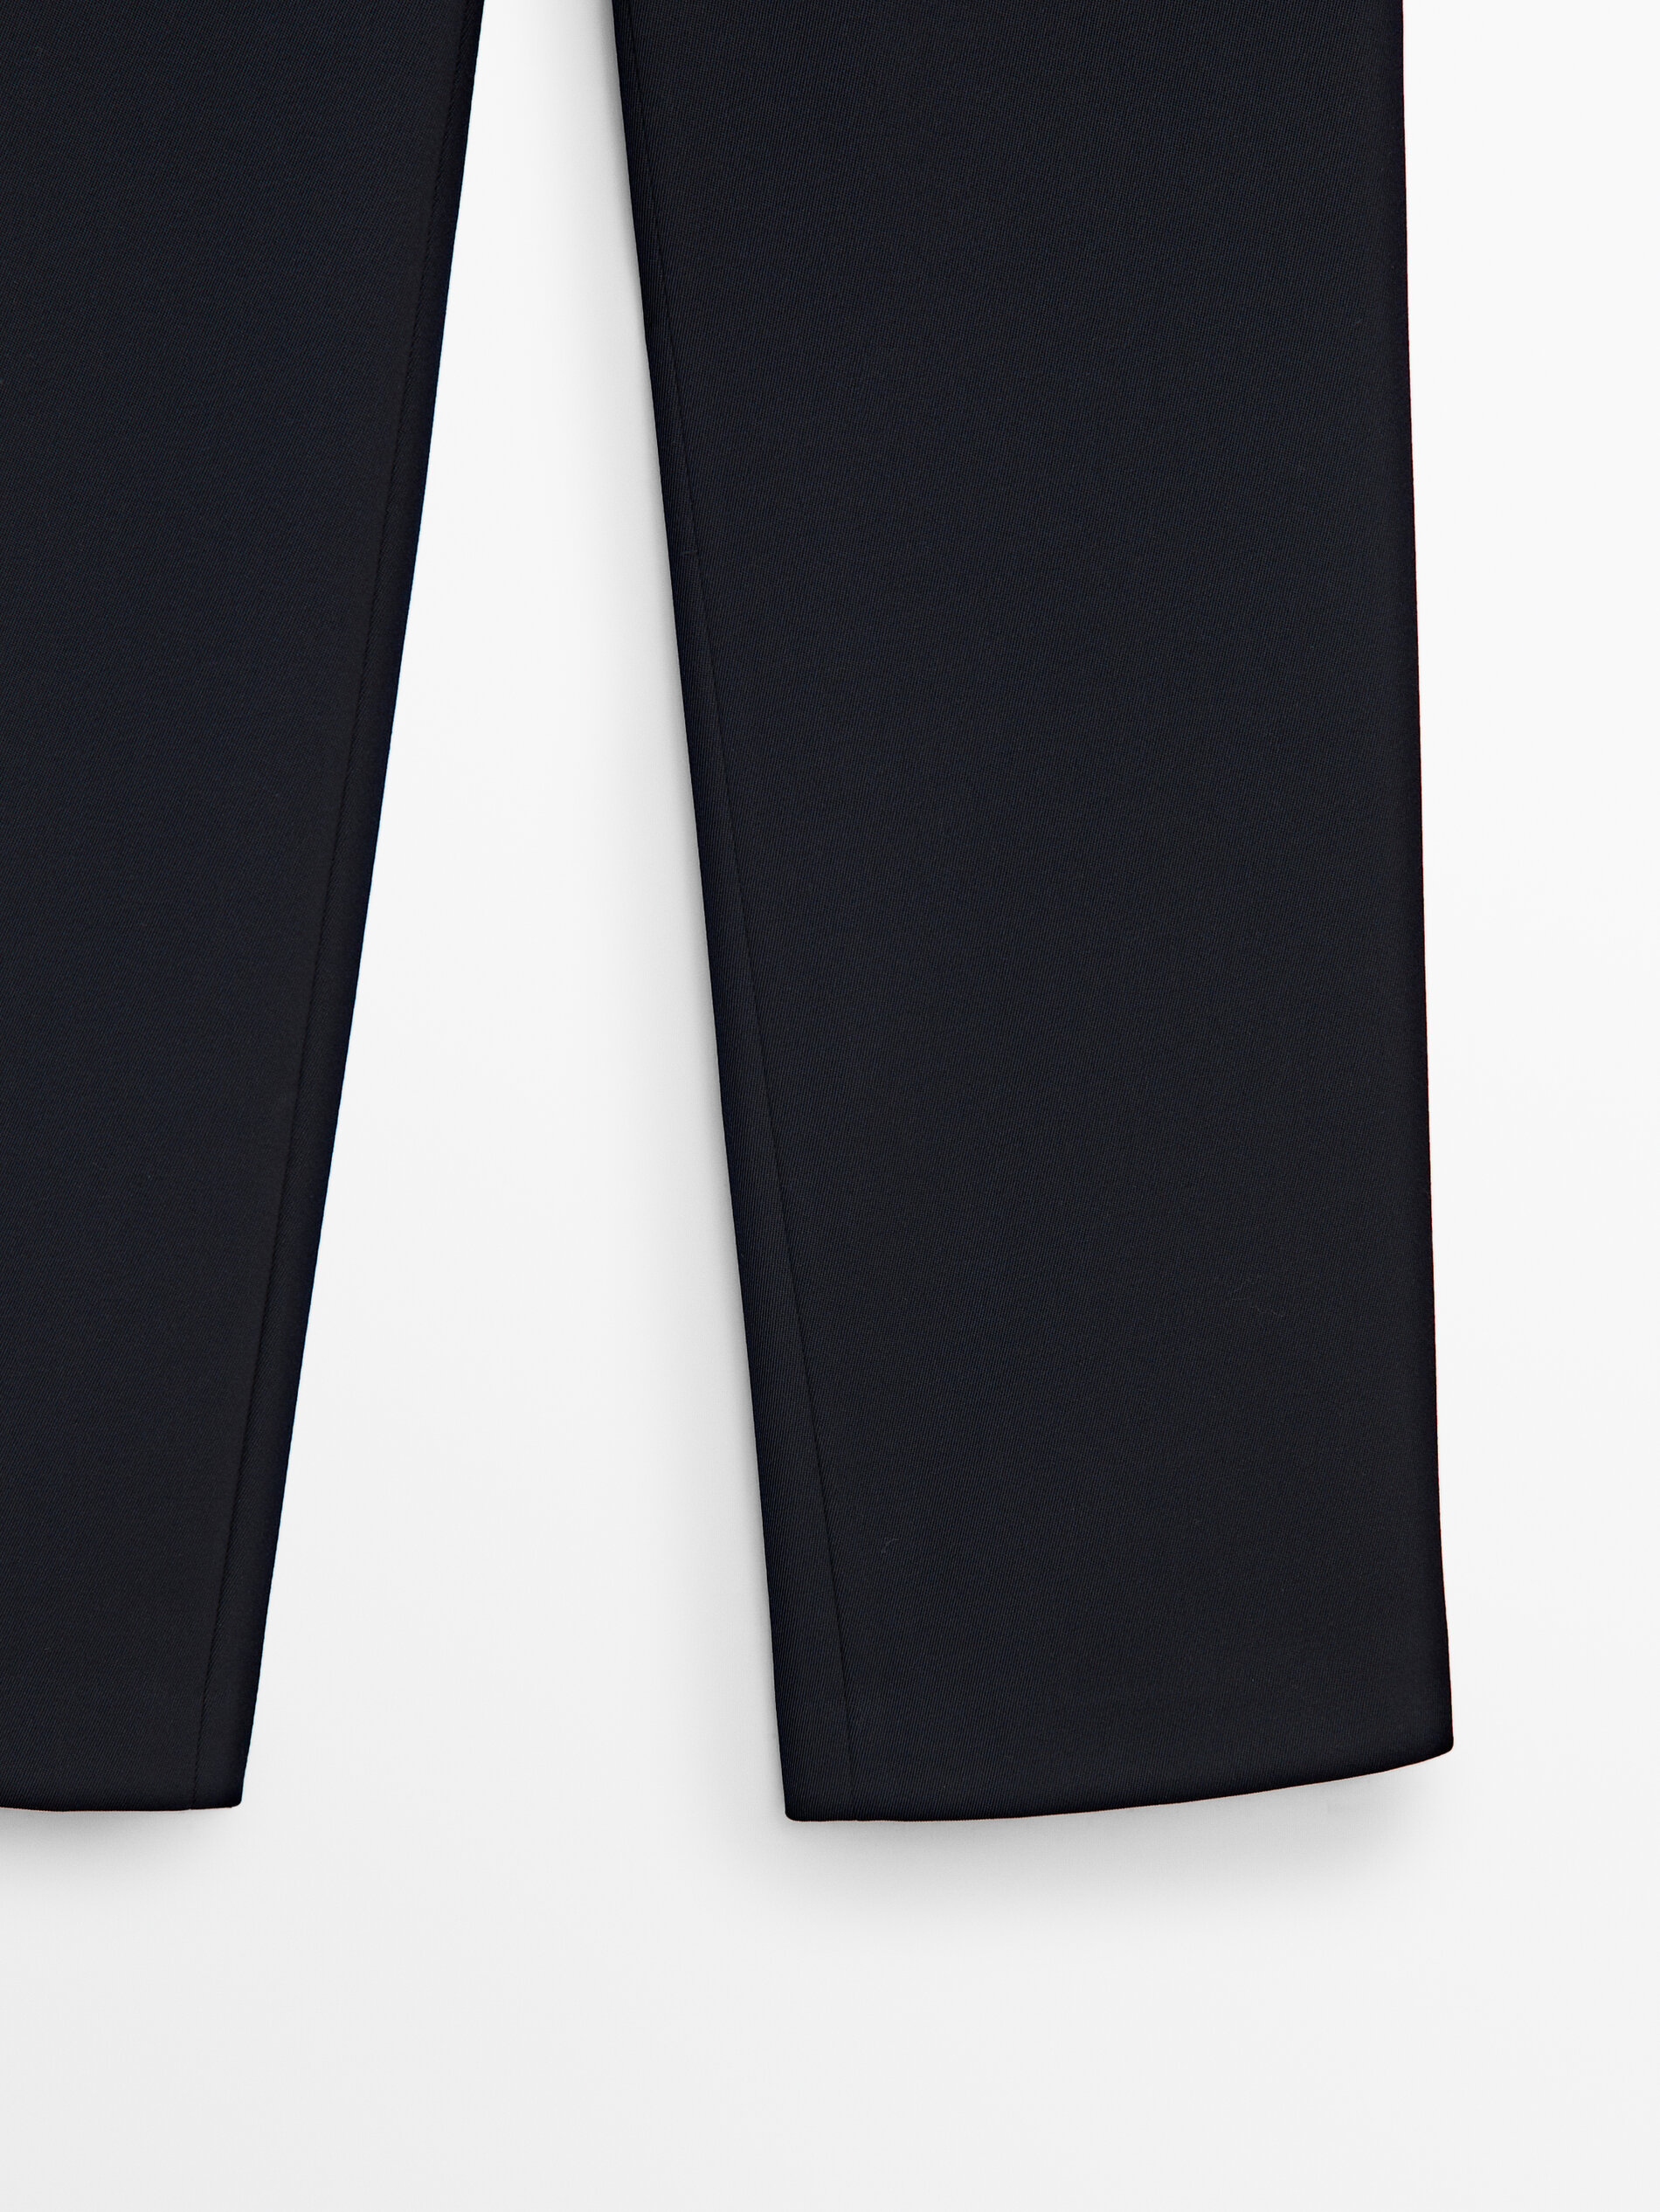 Straight-fit plain navy blue trousers · Navy Blue · Dressy